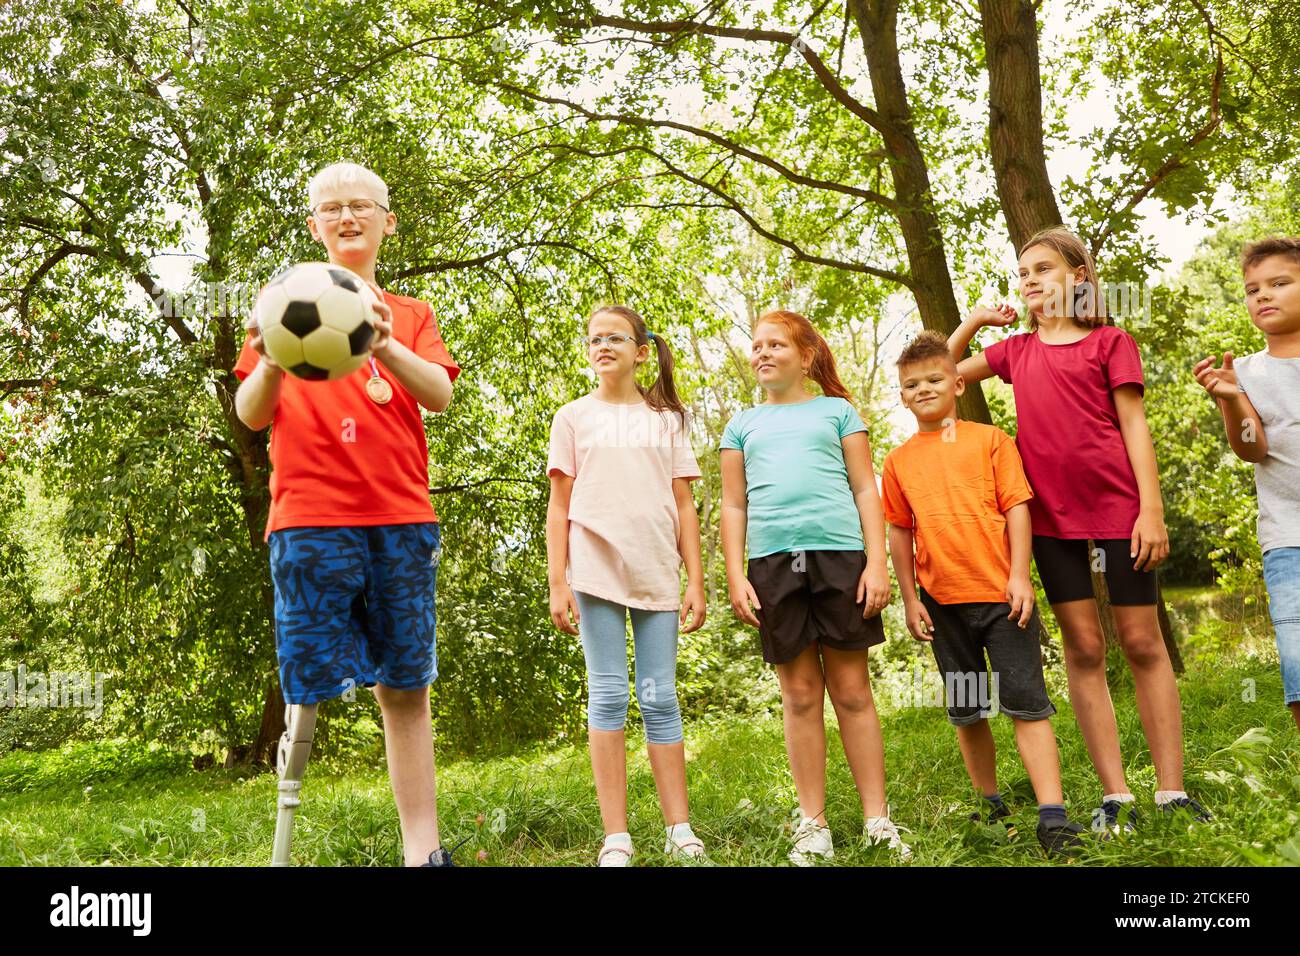 Disabled boy playing soccer while standing with male and female friends at park Stock Photo